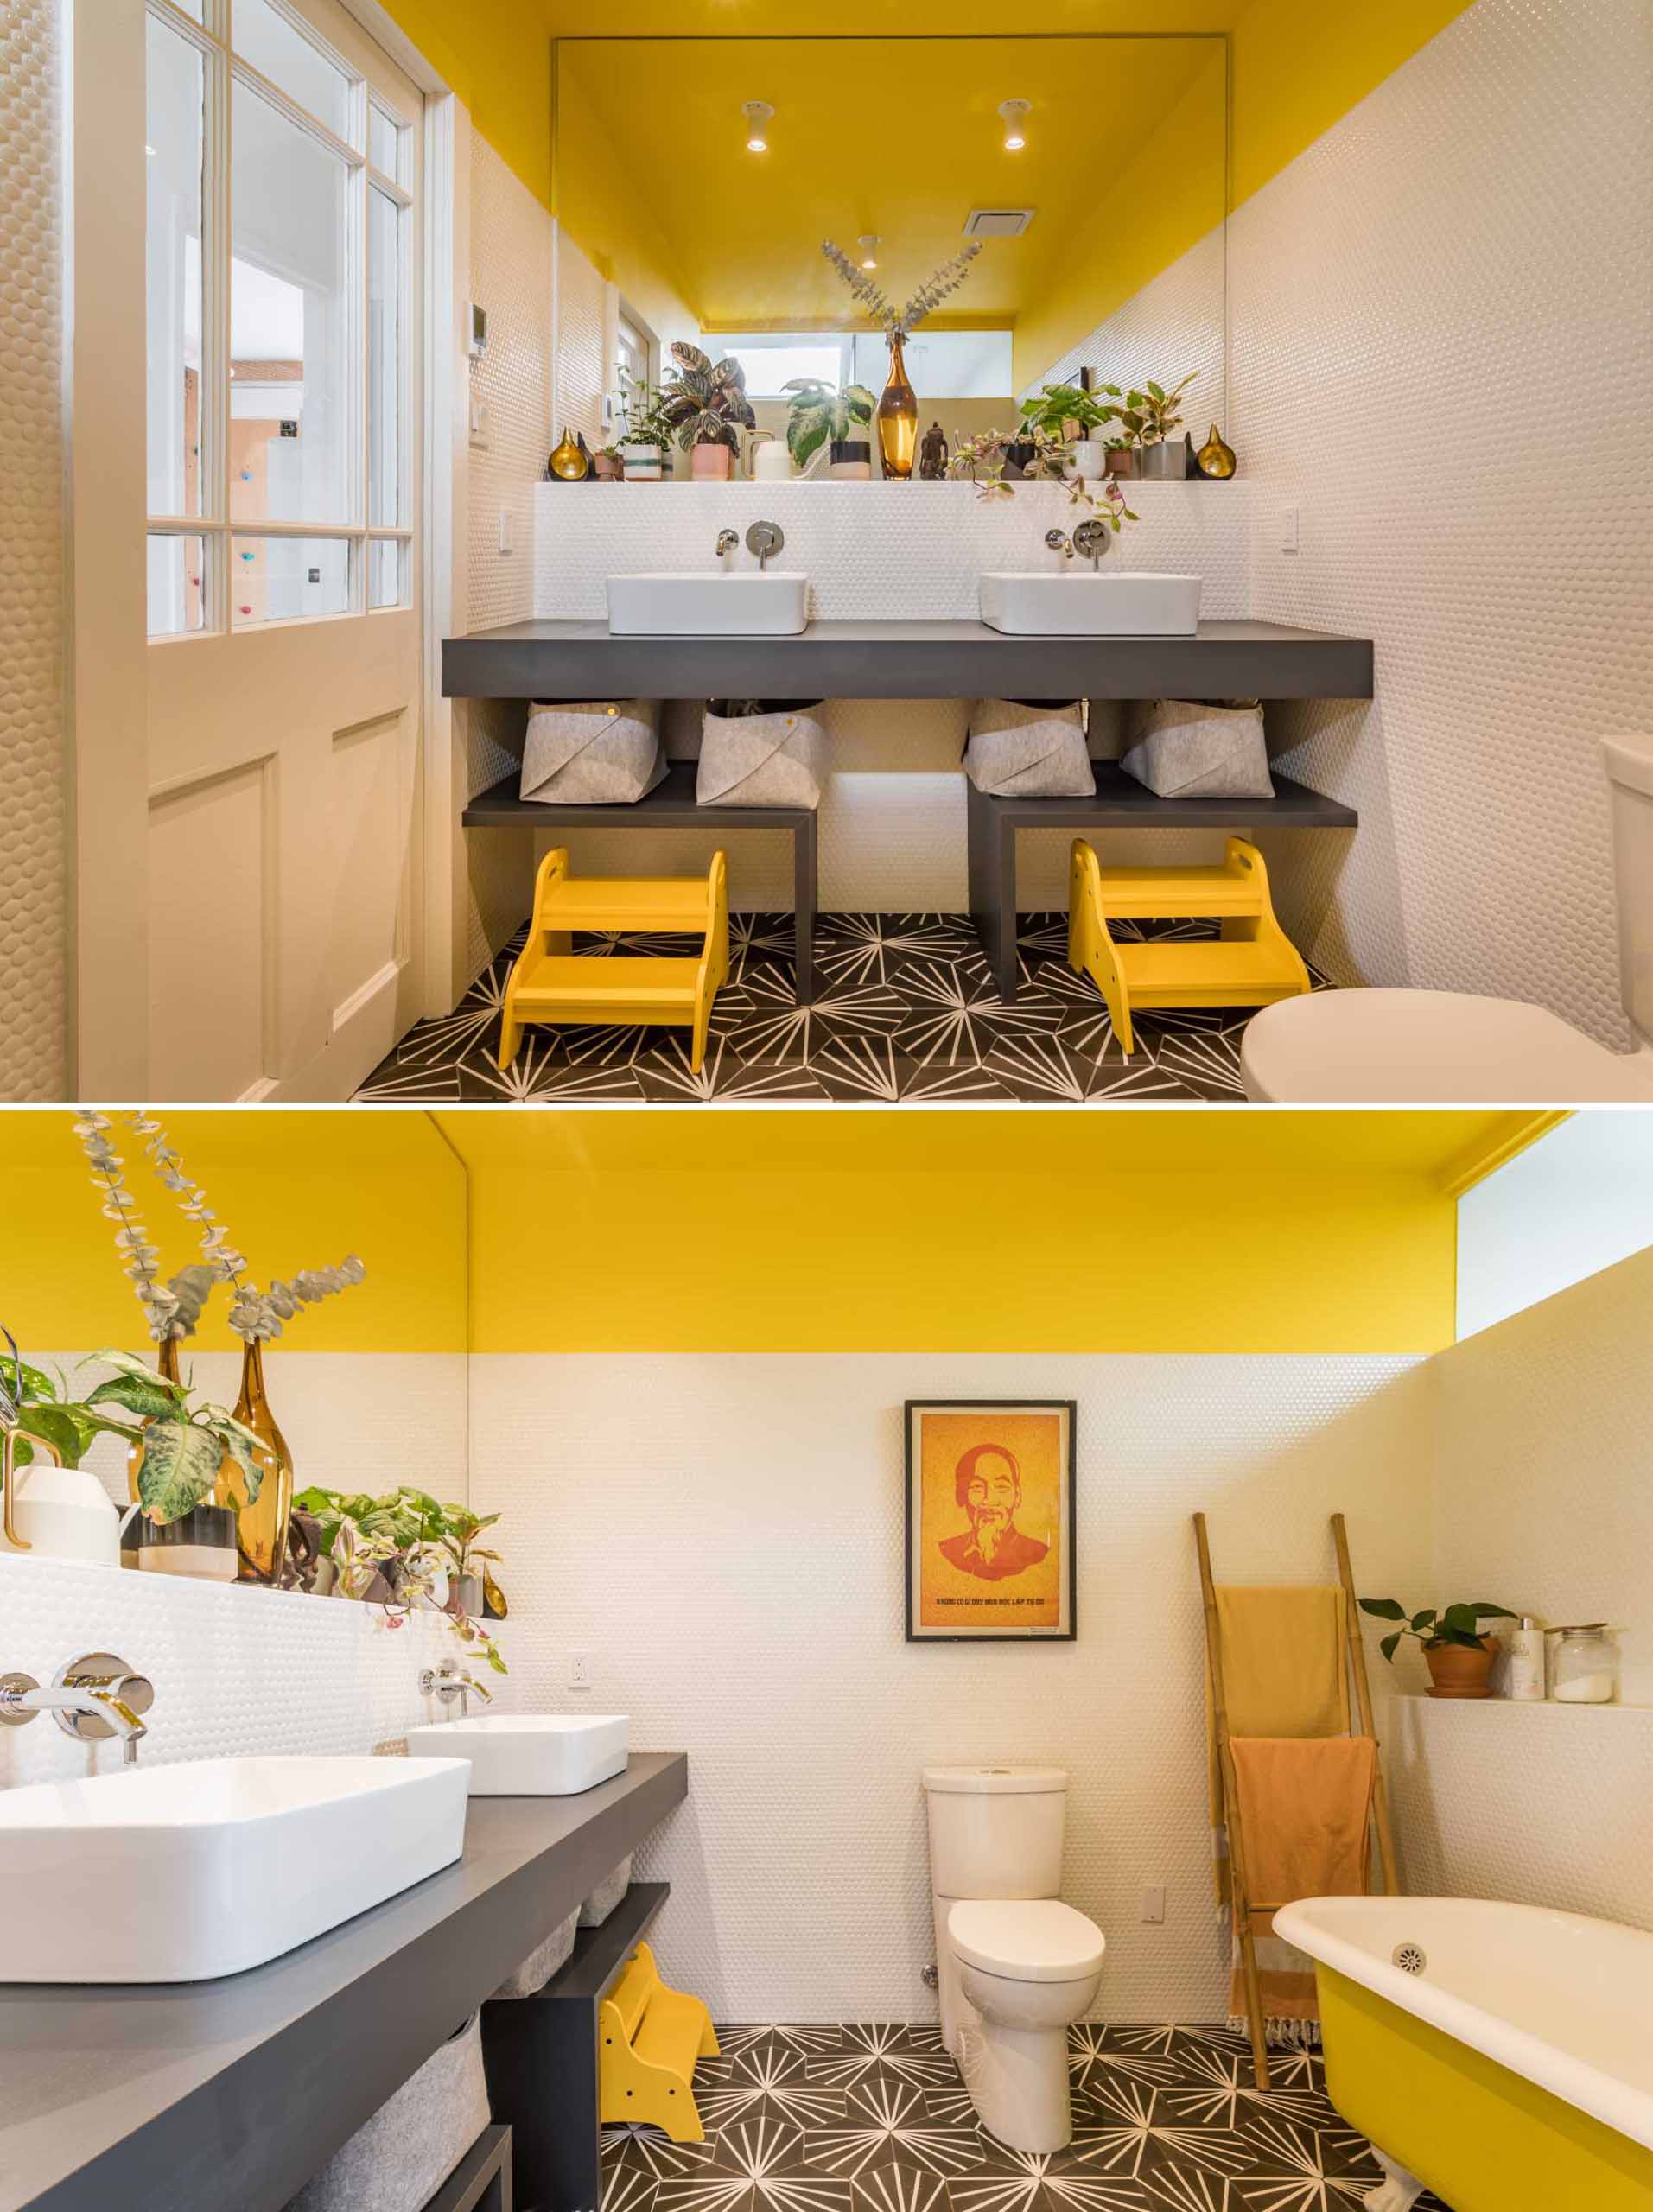 Yellow and white have been chosen for the color palette of this modern bathroom, while black and white tiles cover the floor.